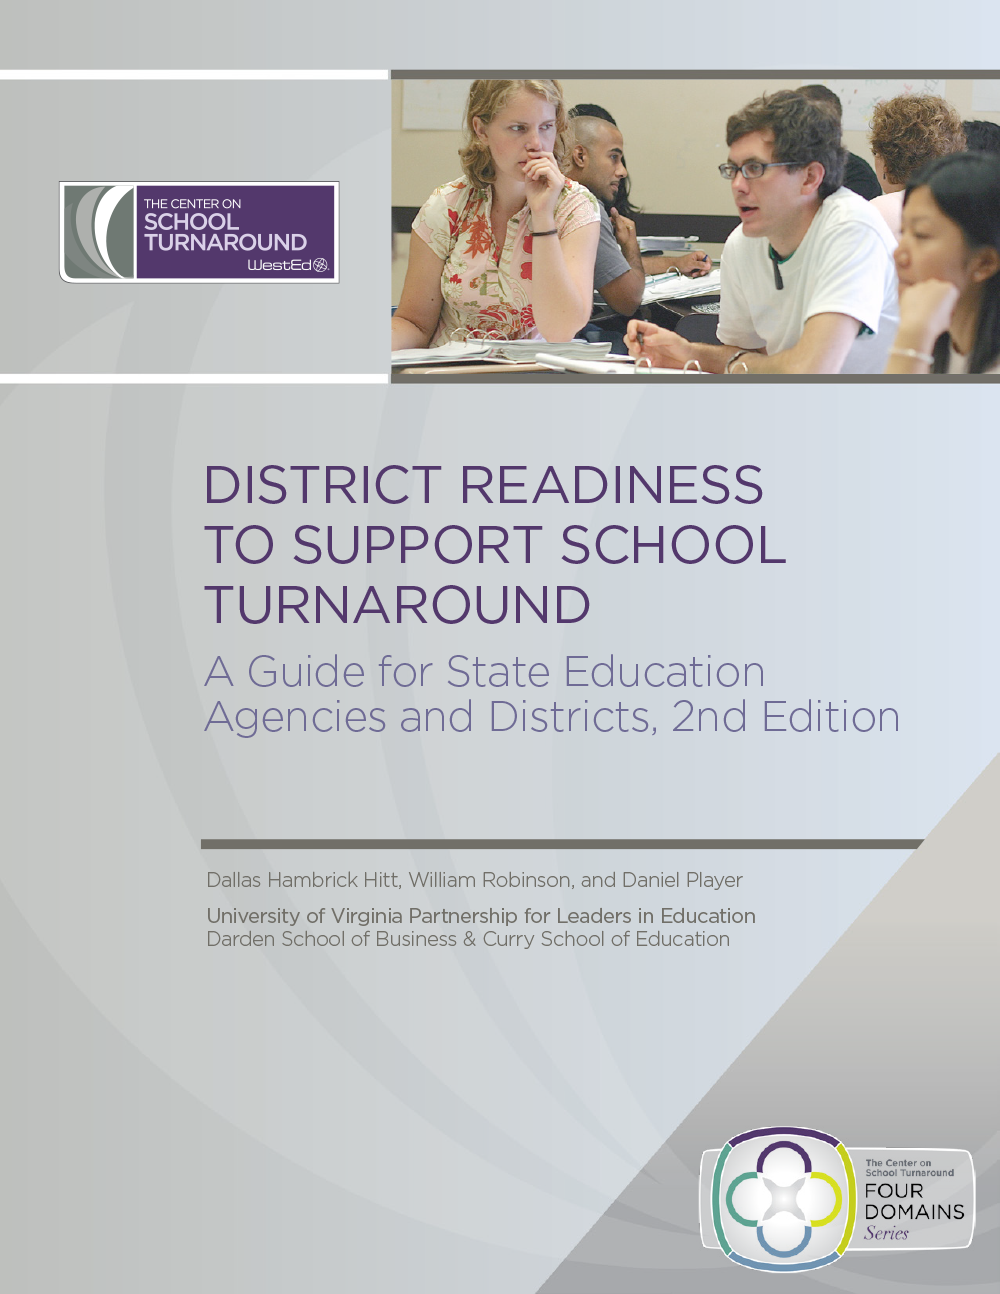 District Readiness to Support School Turnaround: A Guide for State Education Agencies and Districts, 2nd Edition